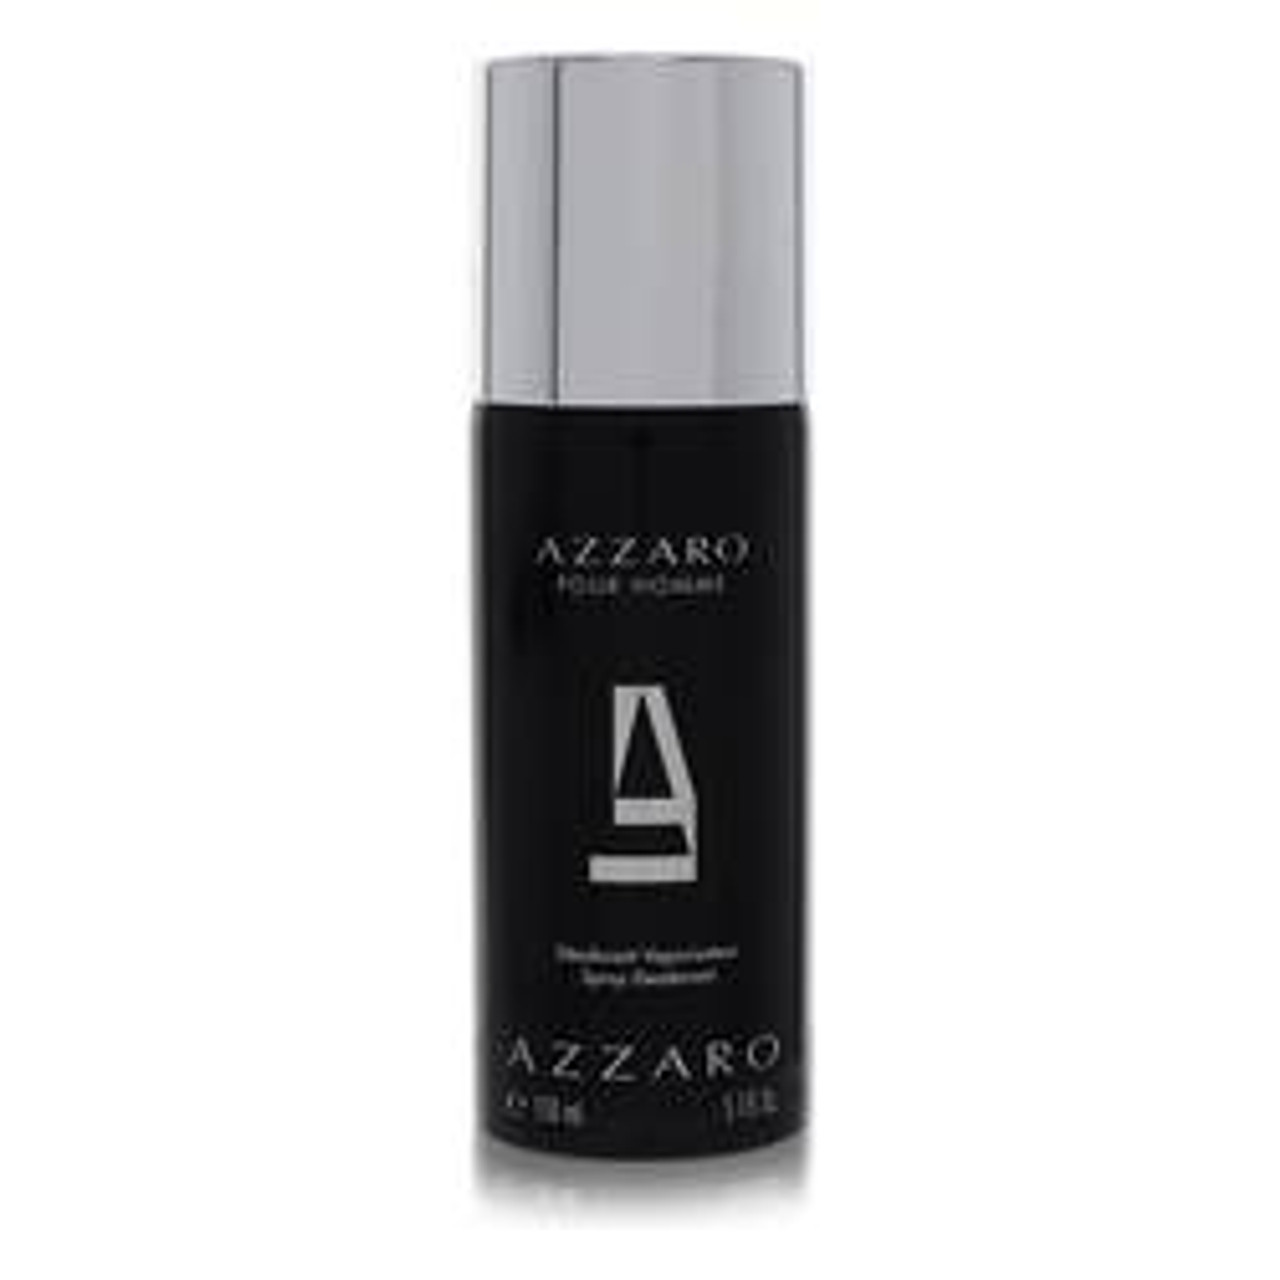 Azzaro Cologne By Azzaro Deodorant Spray (unboxed) 5 oz for Men - [From 64.00 - Choose pk Qty ] - *Ships from Miami